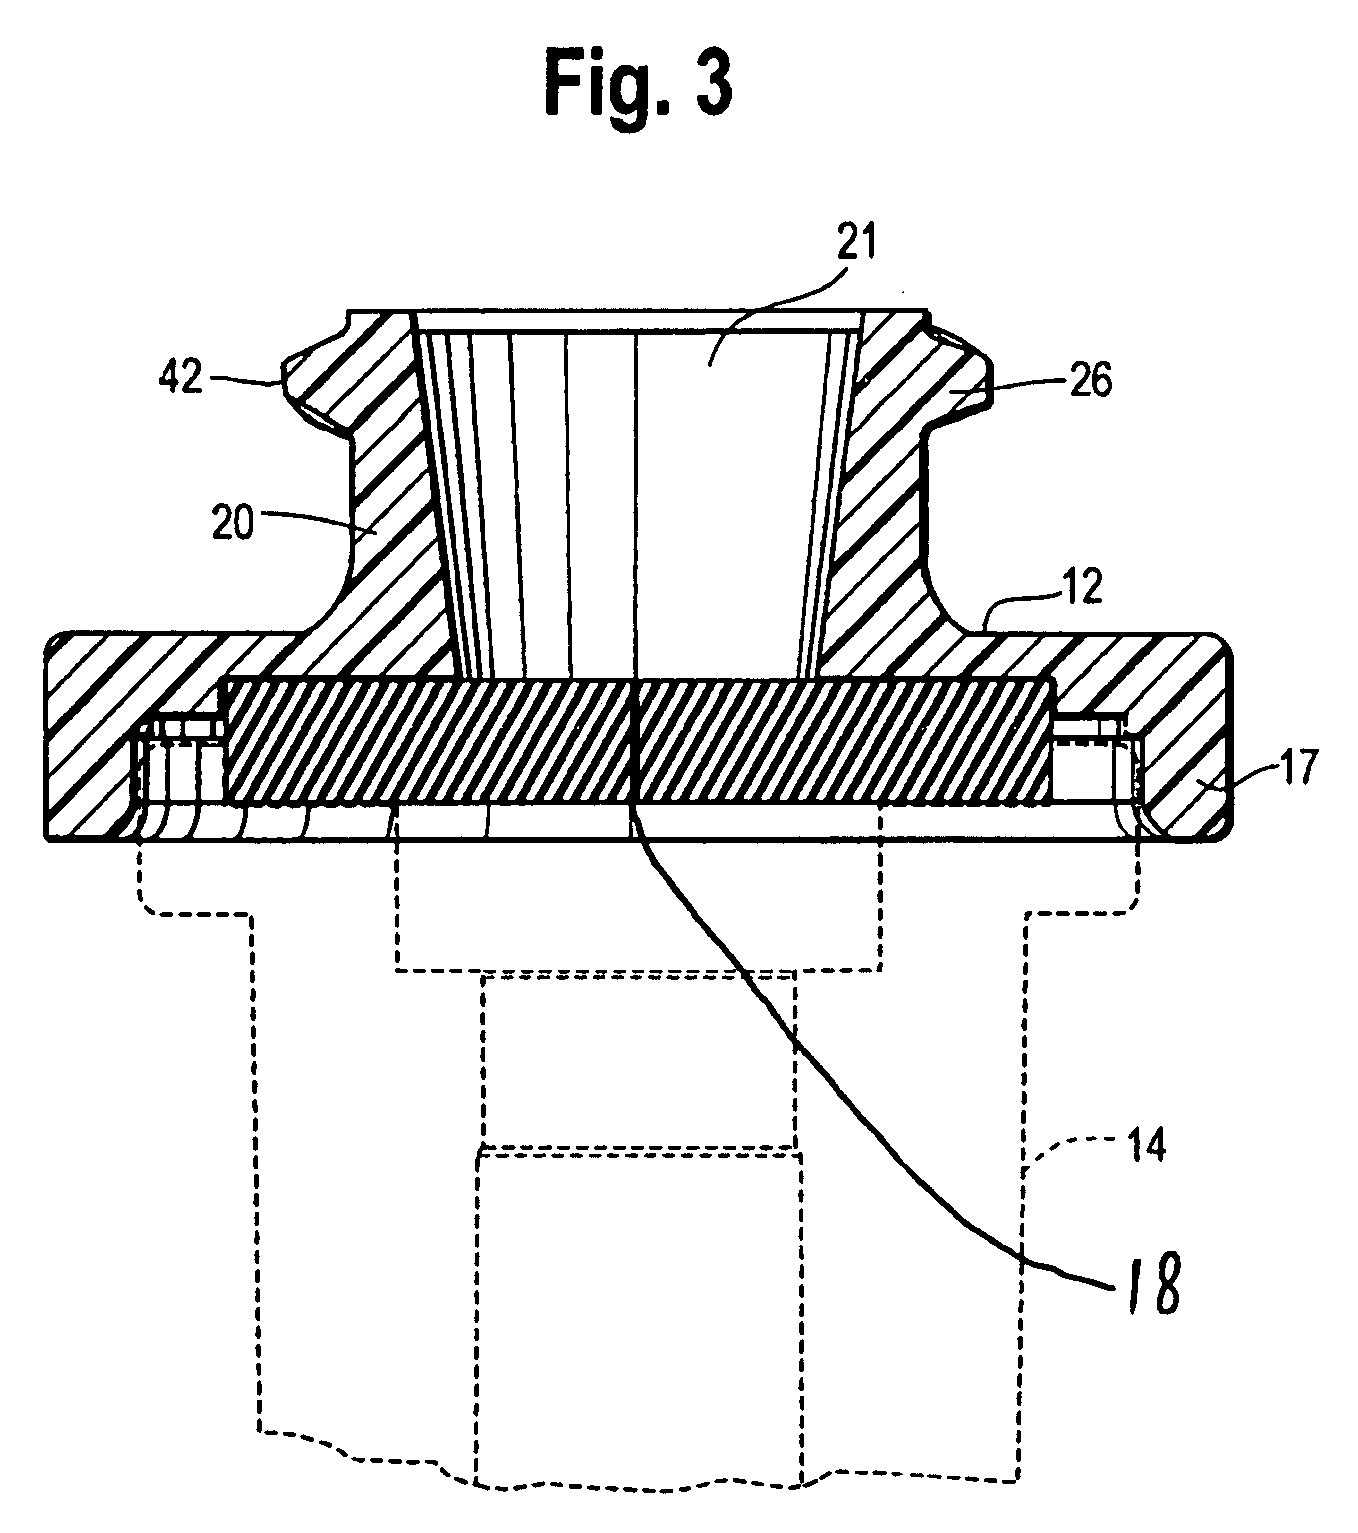 Fluid flow connector permitting forceful lateral separation